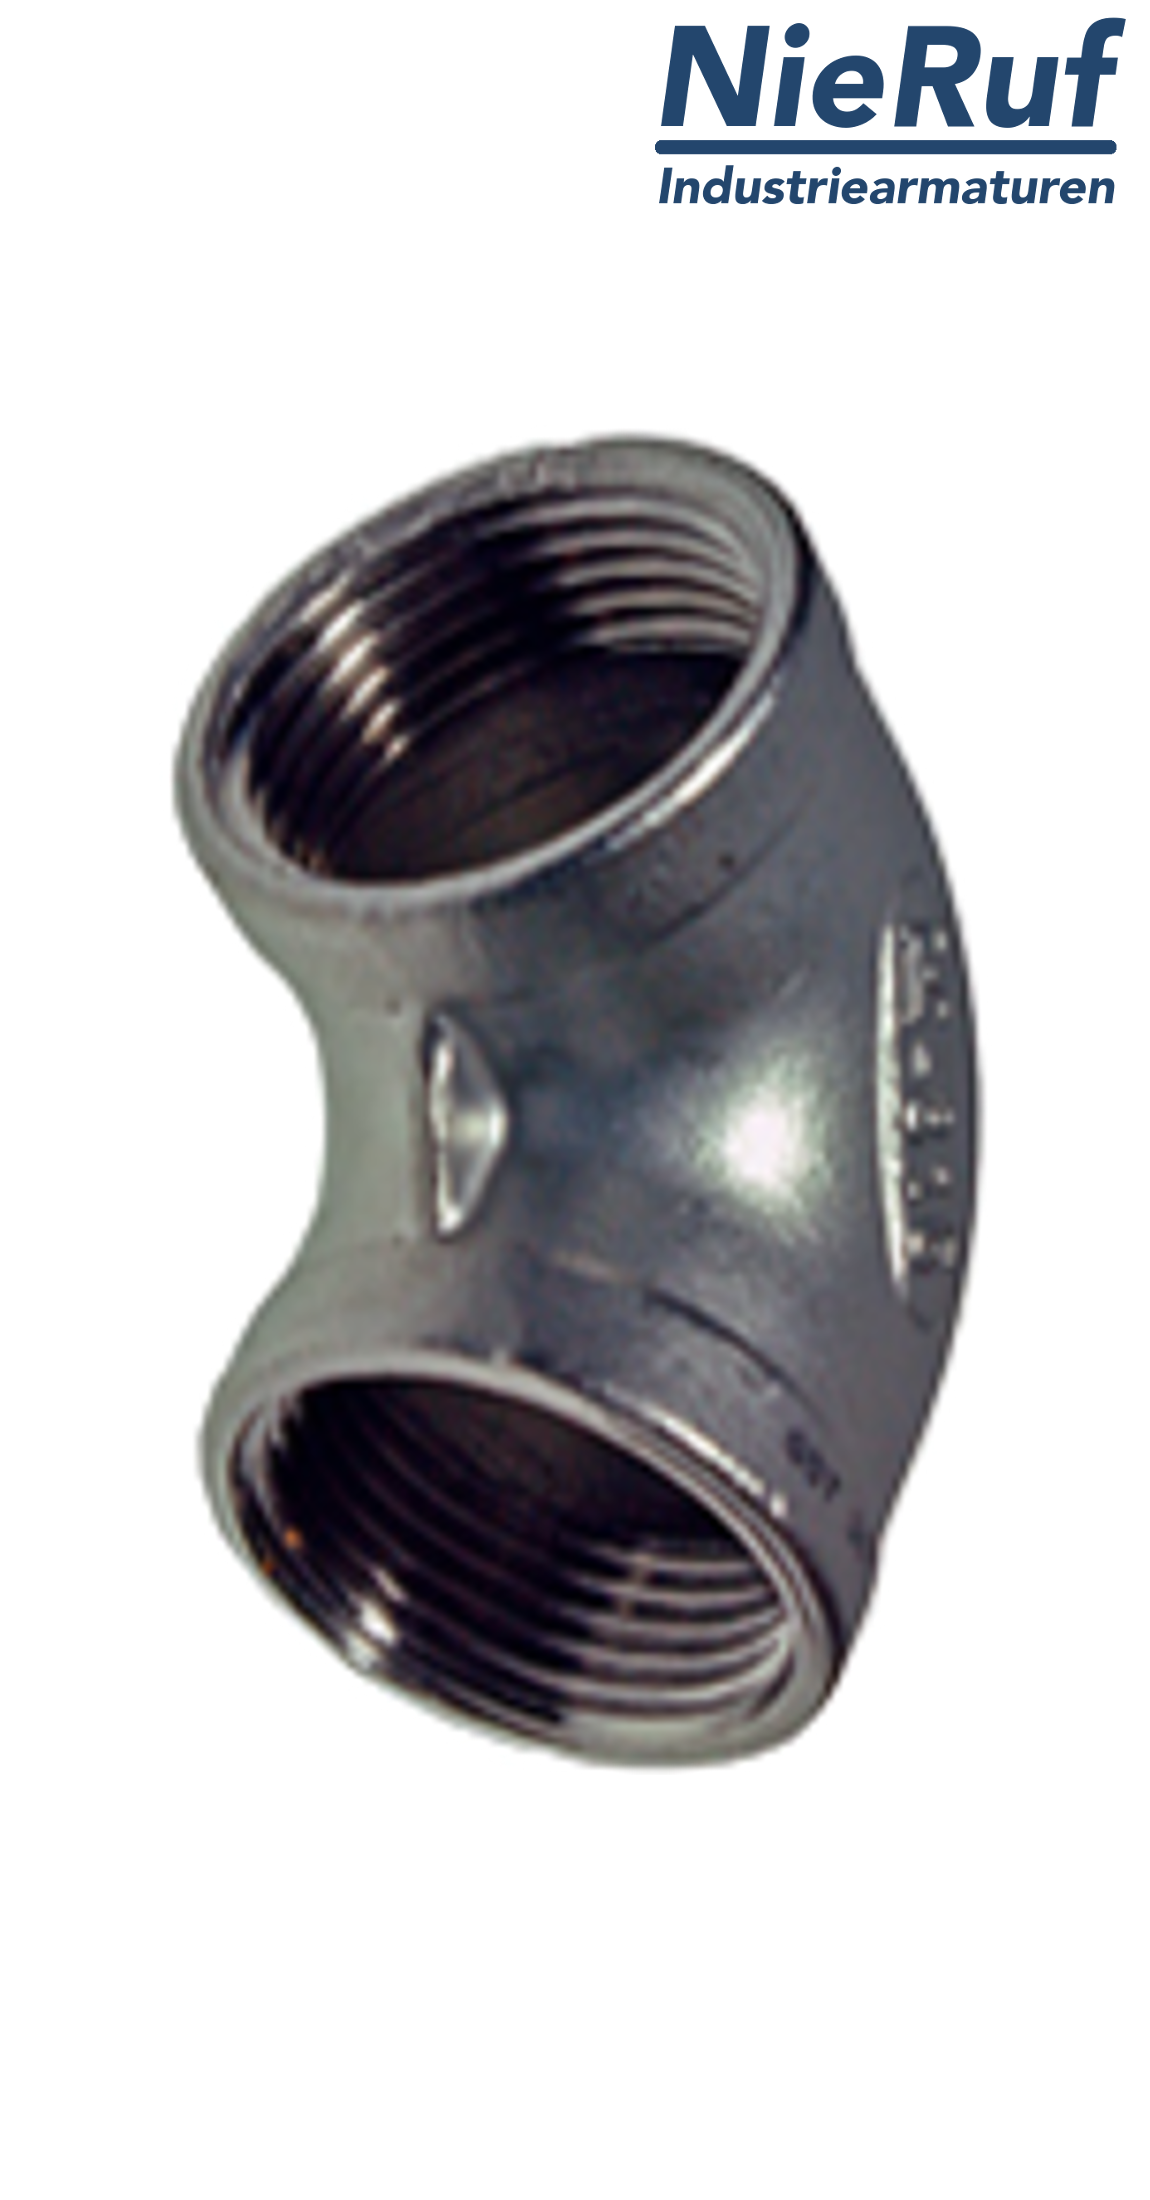 elbow 3/4" inch NPT stainless steel 316 90° angle